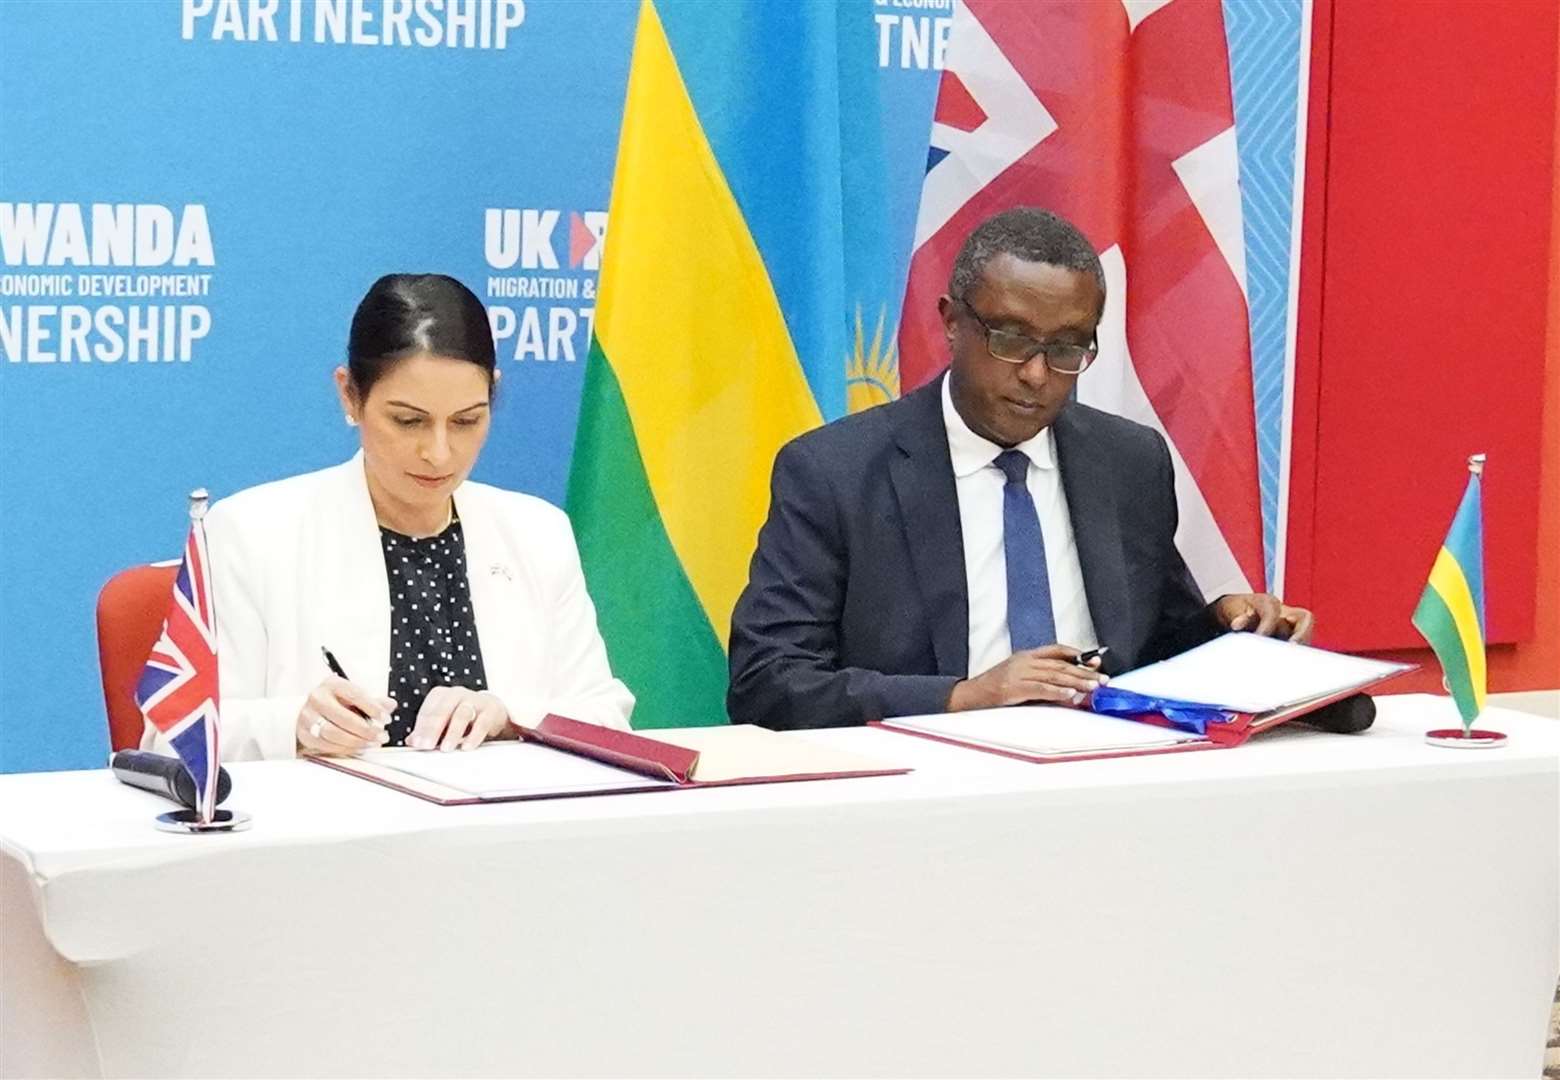 Priti Patel, as home secretary, signed the initial agreement with Vincent Biruta during a visit to Kigali in 2022 (PA)